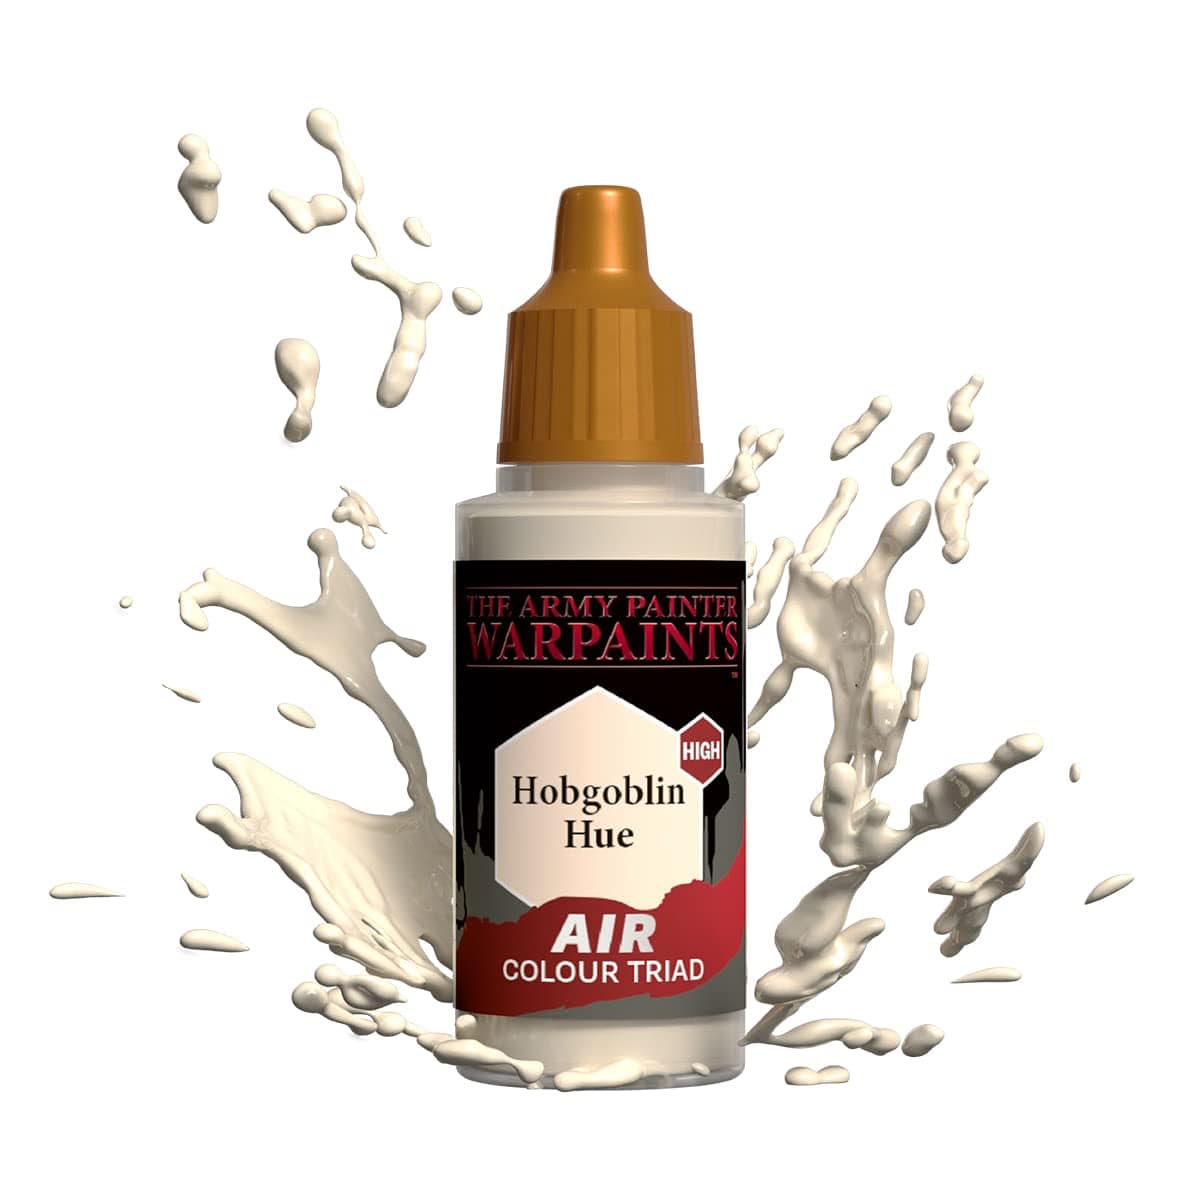 The Army Painter Accessories The Army Painter Warpaints Air: Hobgoblin Hue 18ml